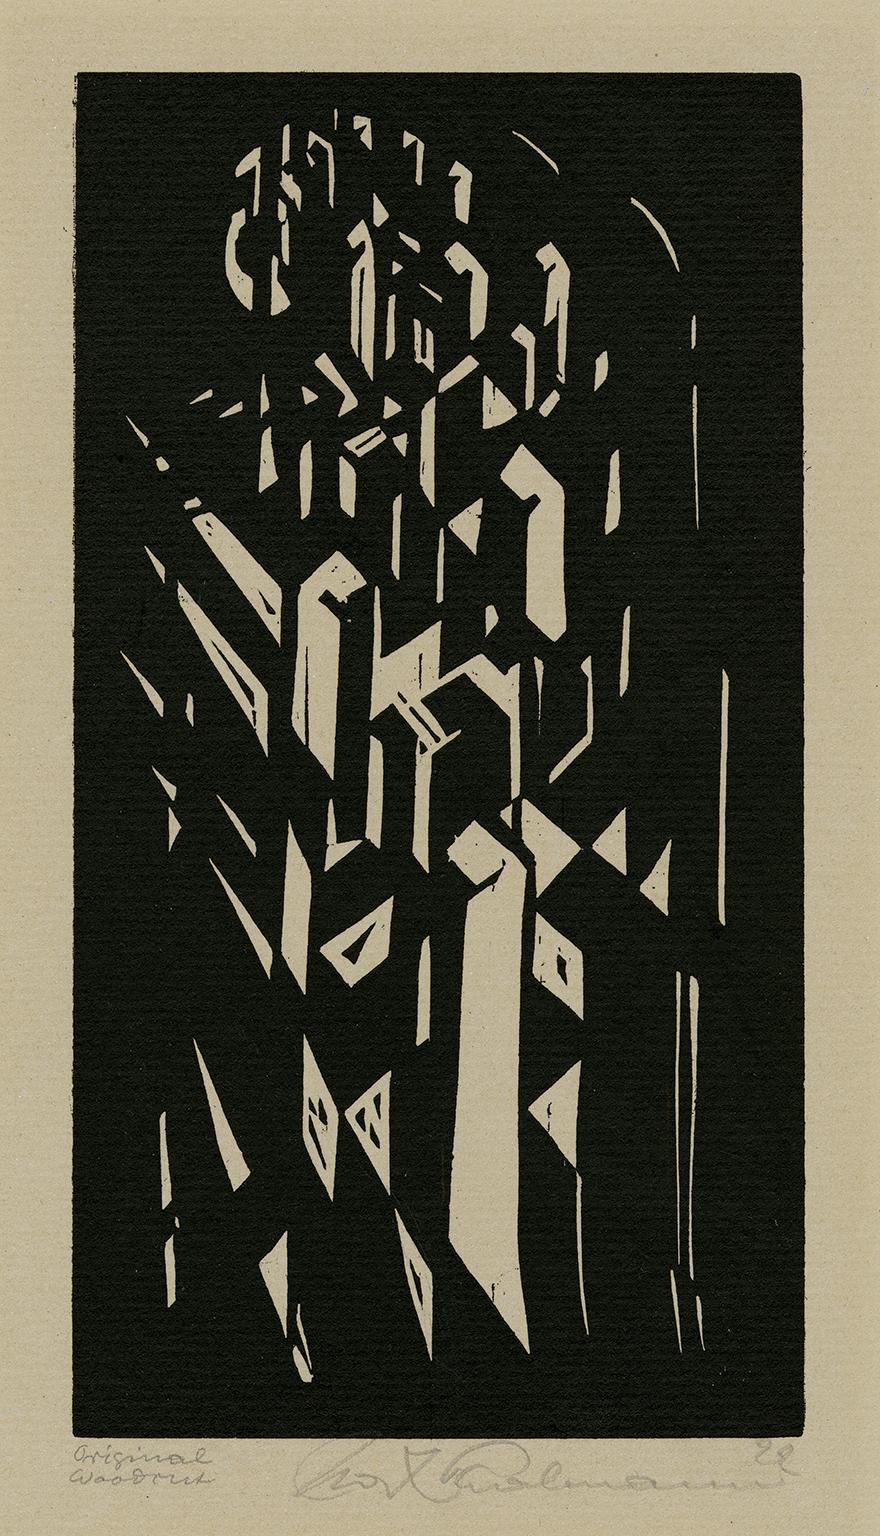 Max Thalmann Abstract Print - Domstudie 19 (Cathedral Study)